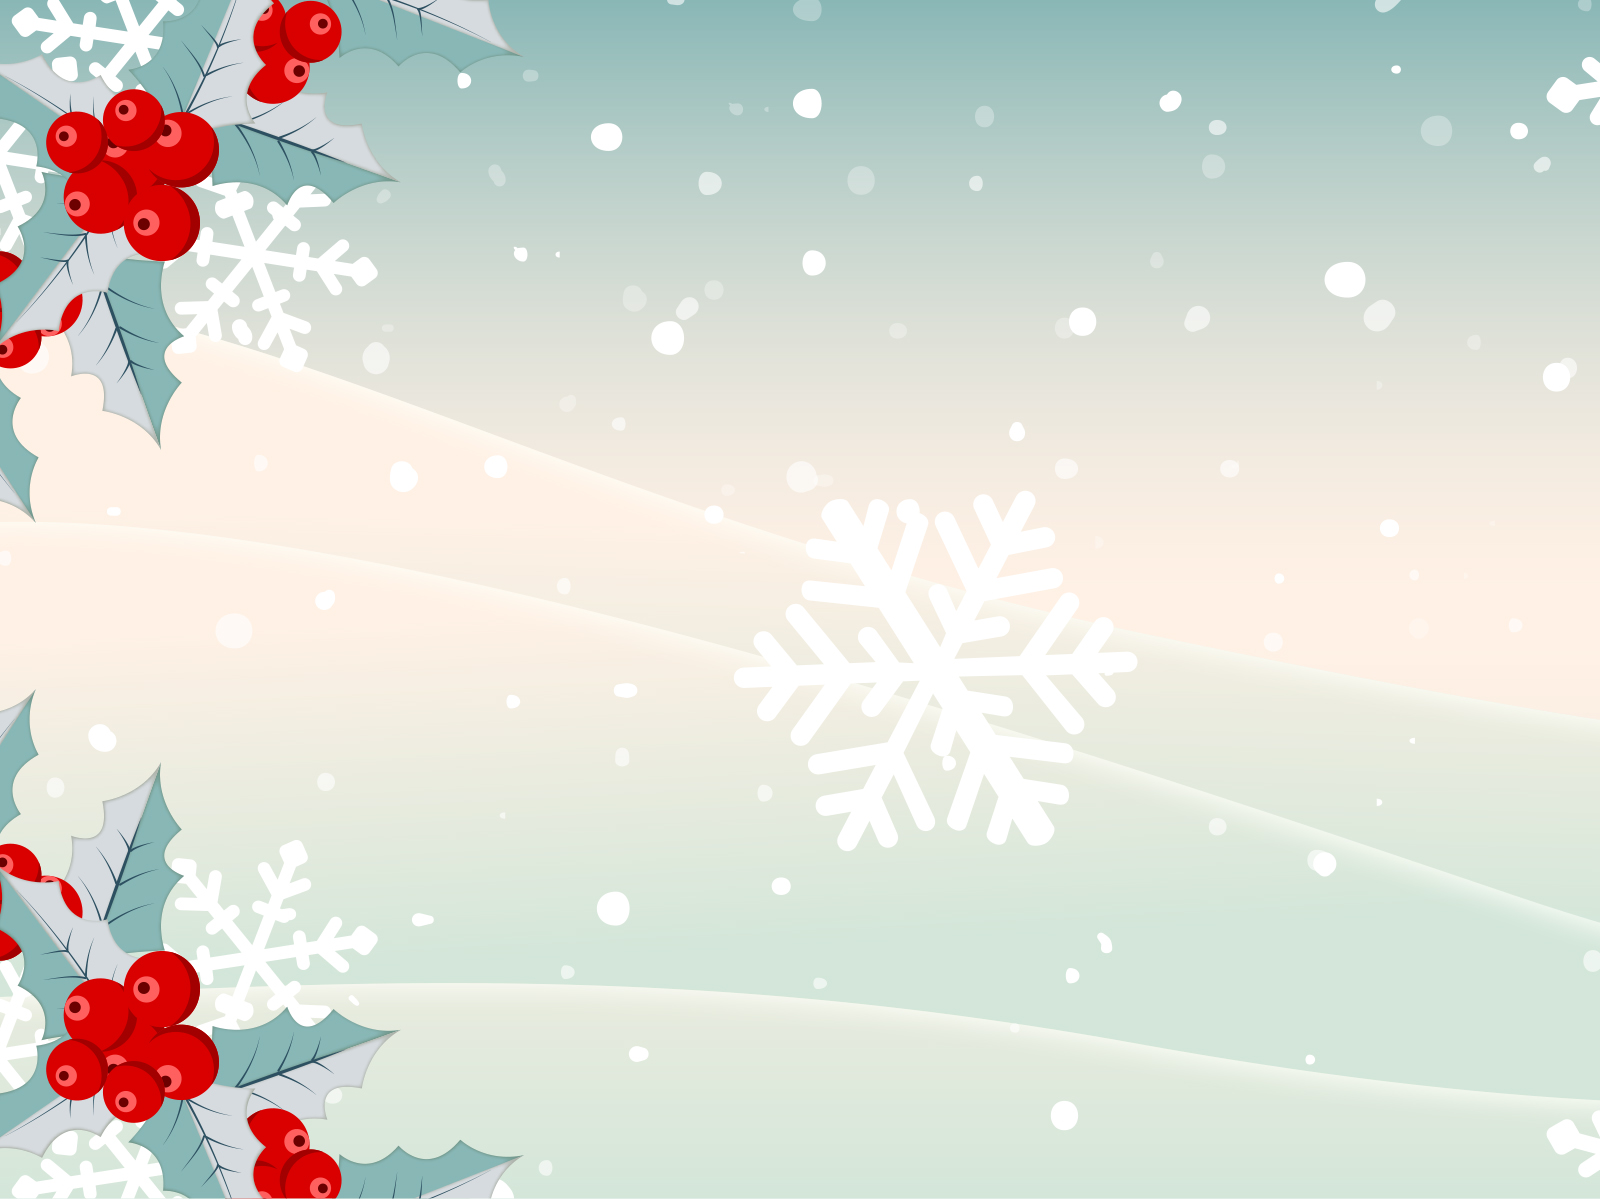 Christmas Powerpoint Templates Page 2 of 3 Free PPT Backgrounds and